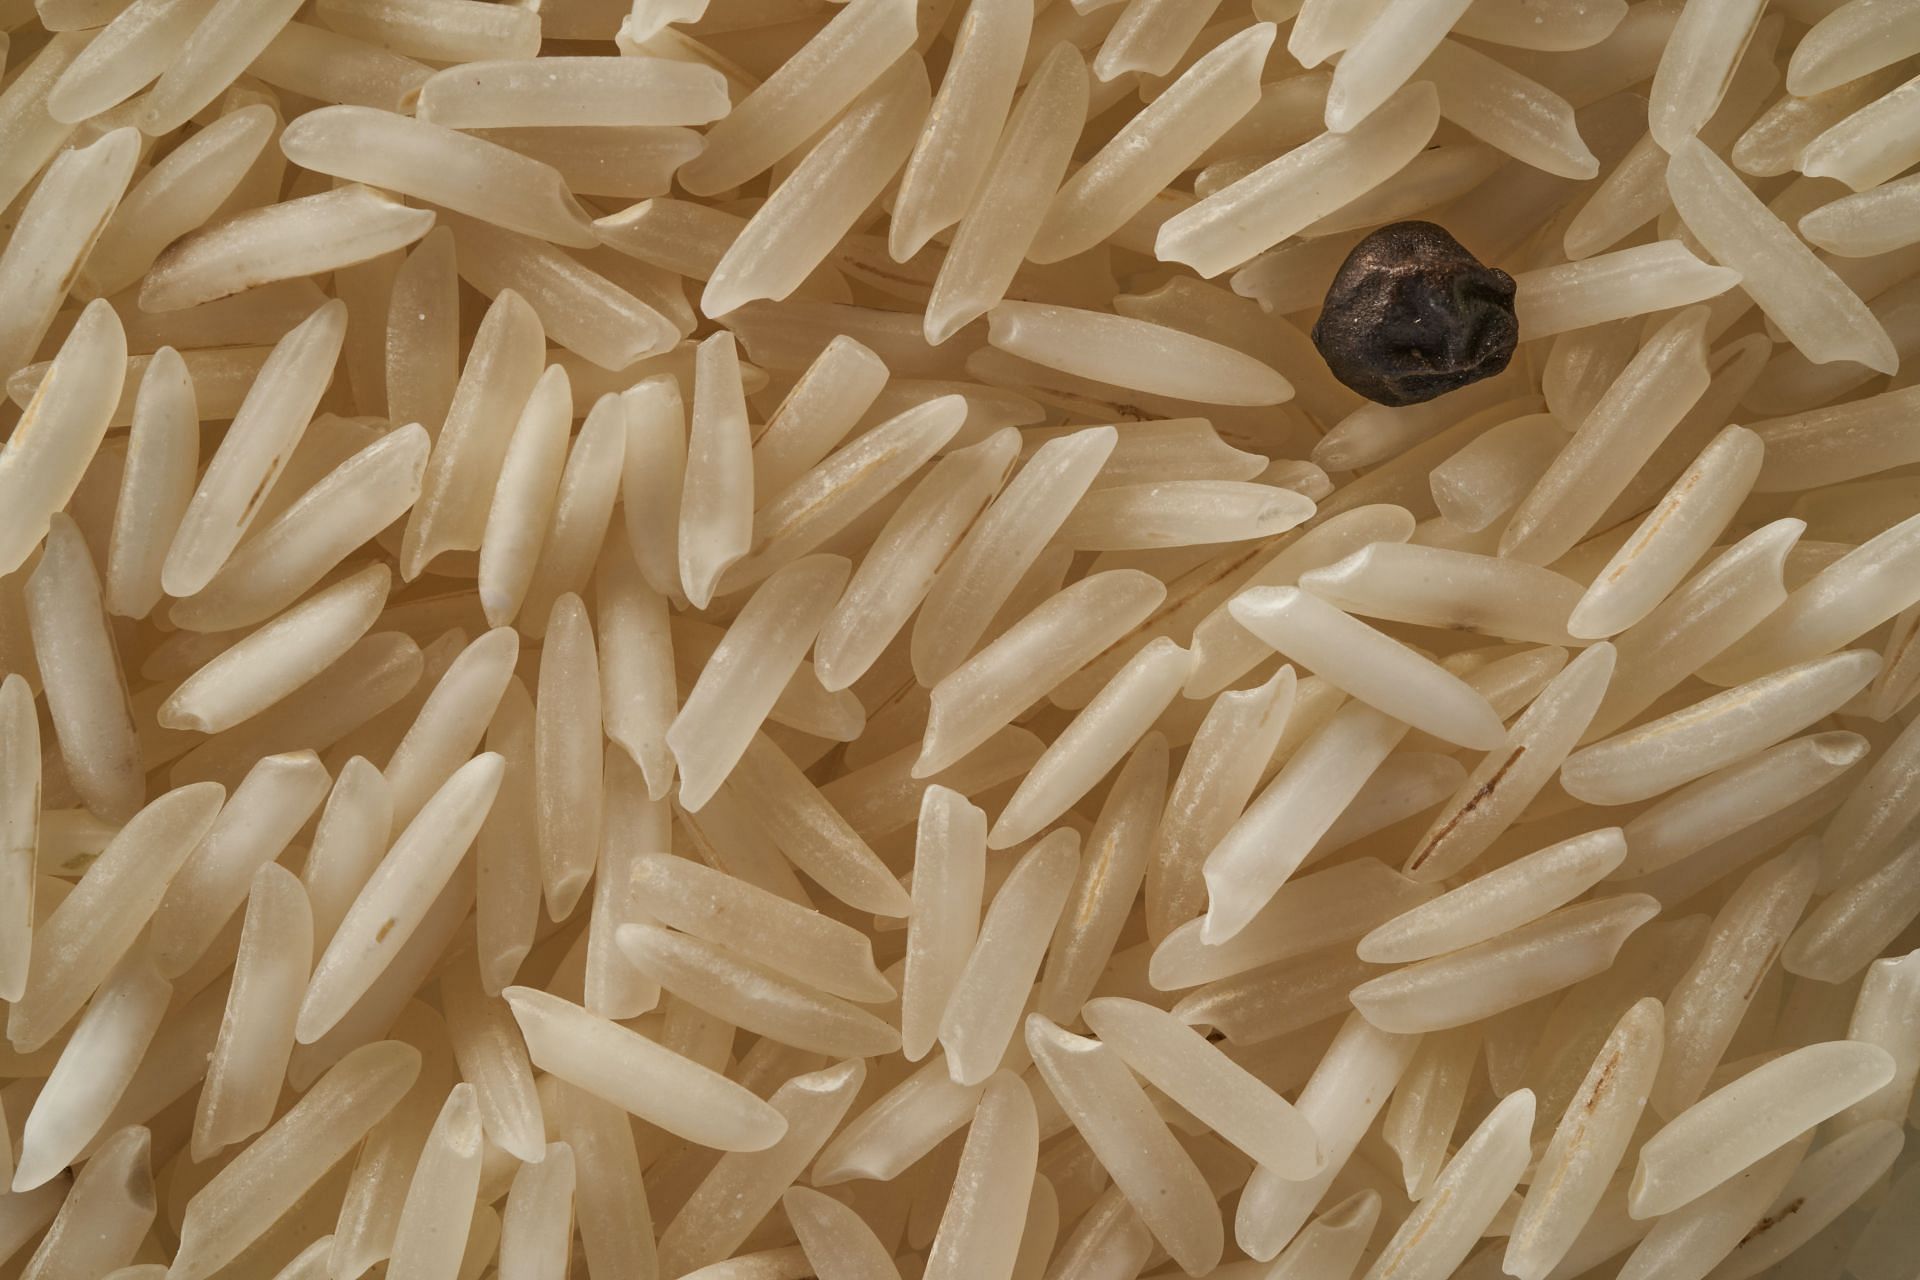 Brown rice is good for weight loss.(Image via Unsplash/Wolfgang Hasselmann))